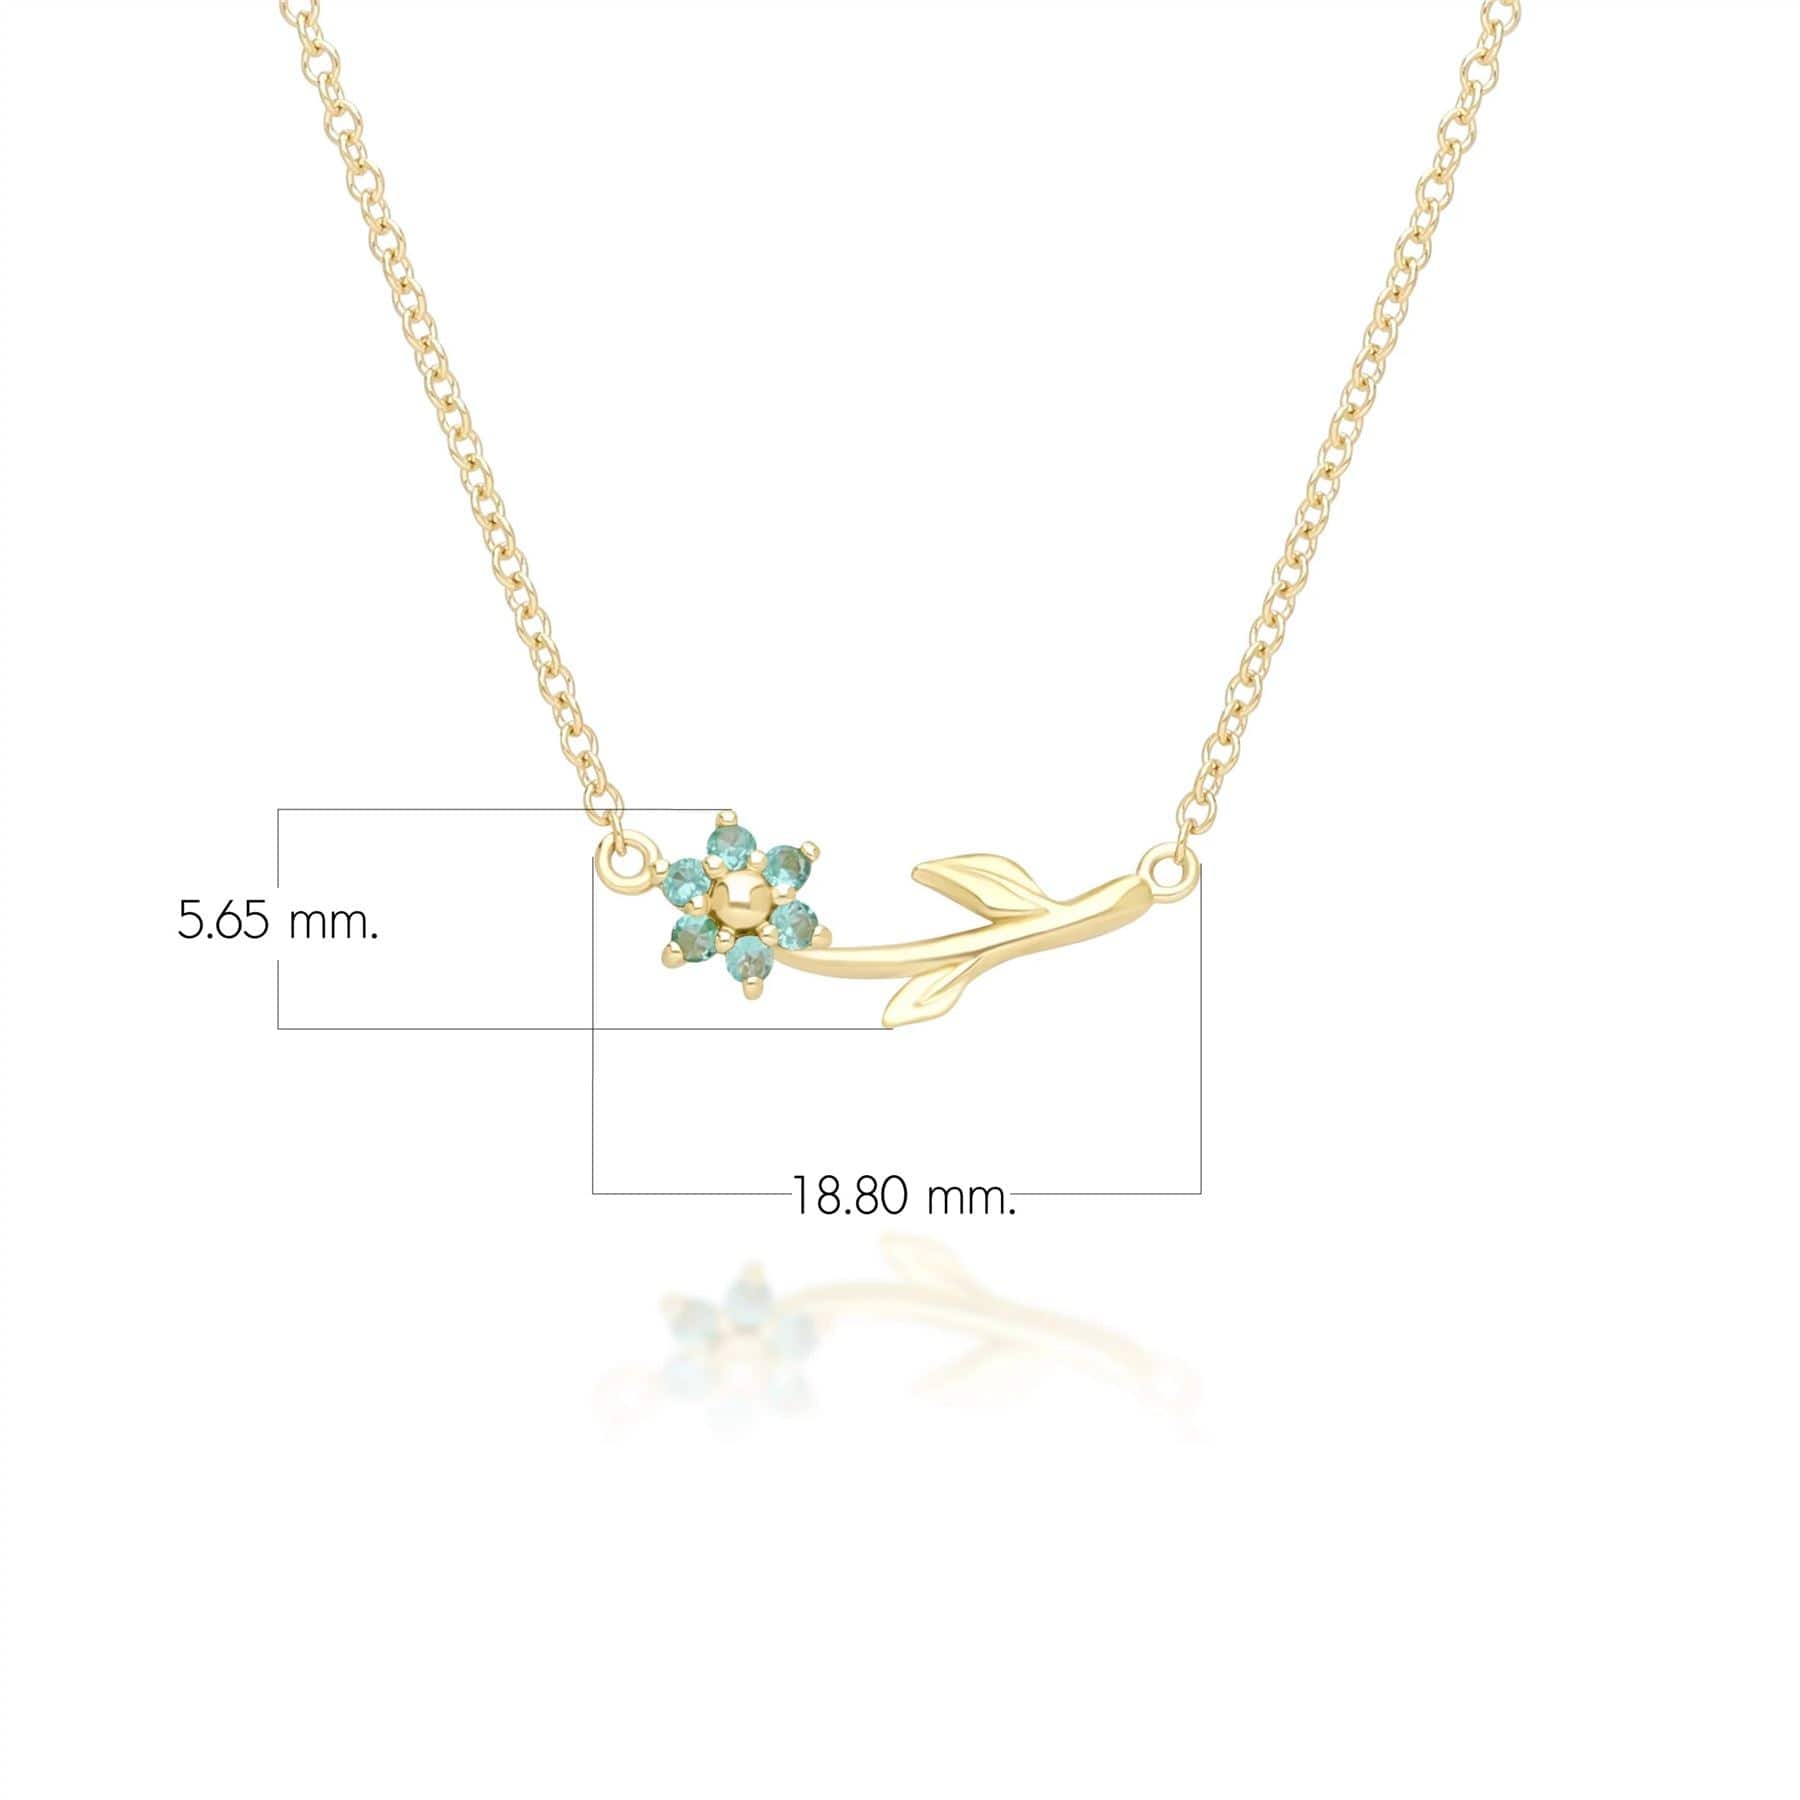 Floral Vine Emerald Necklace in 9ct Yellow Gold